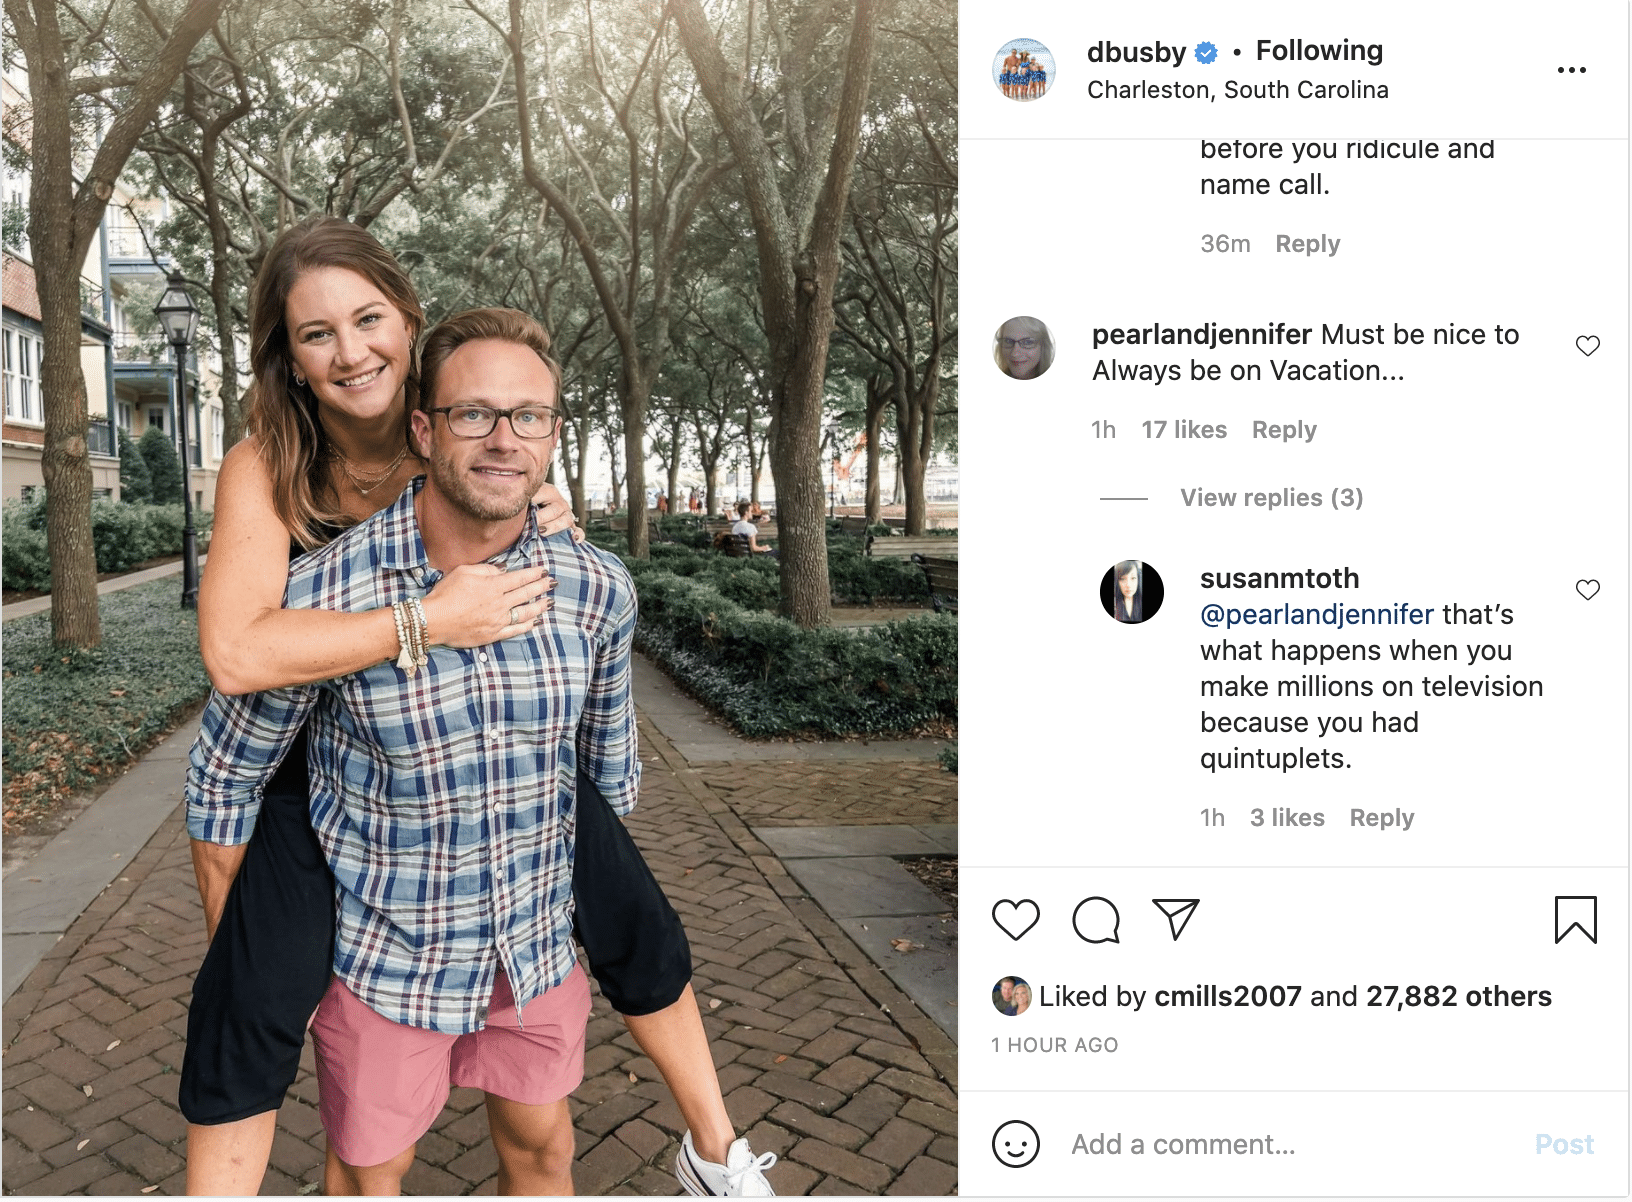 OutDaughtered Danielle Busby